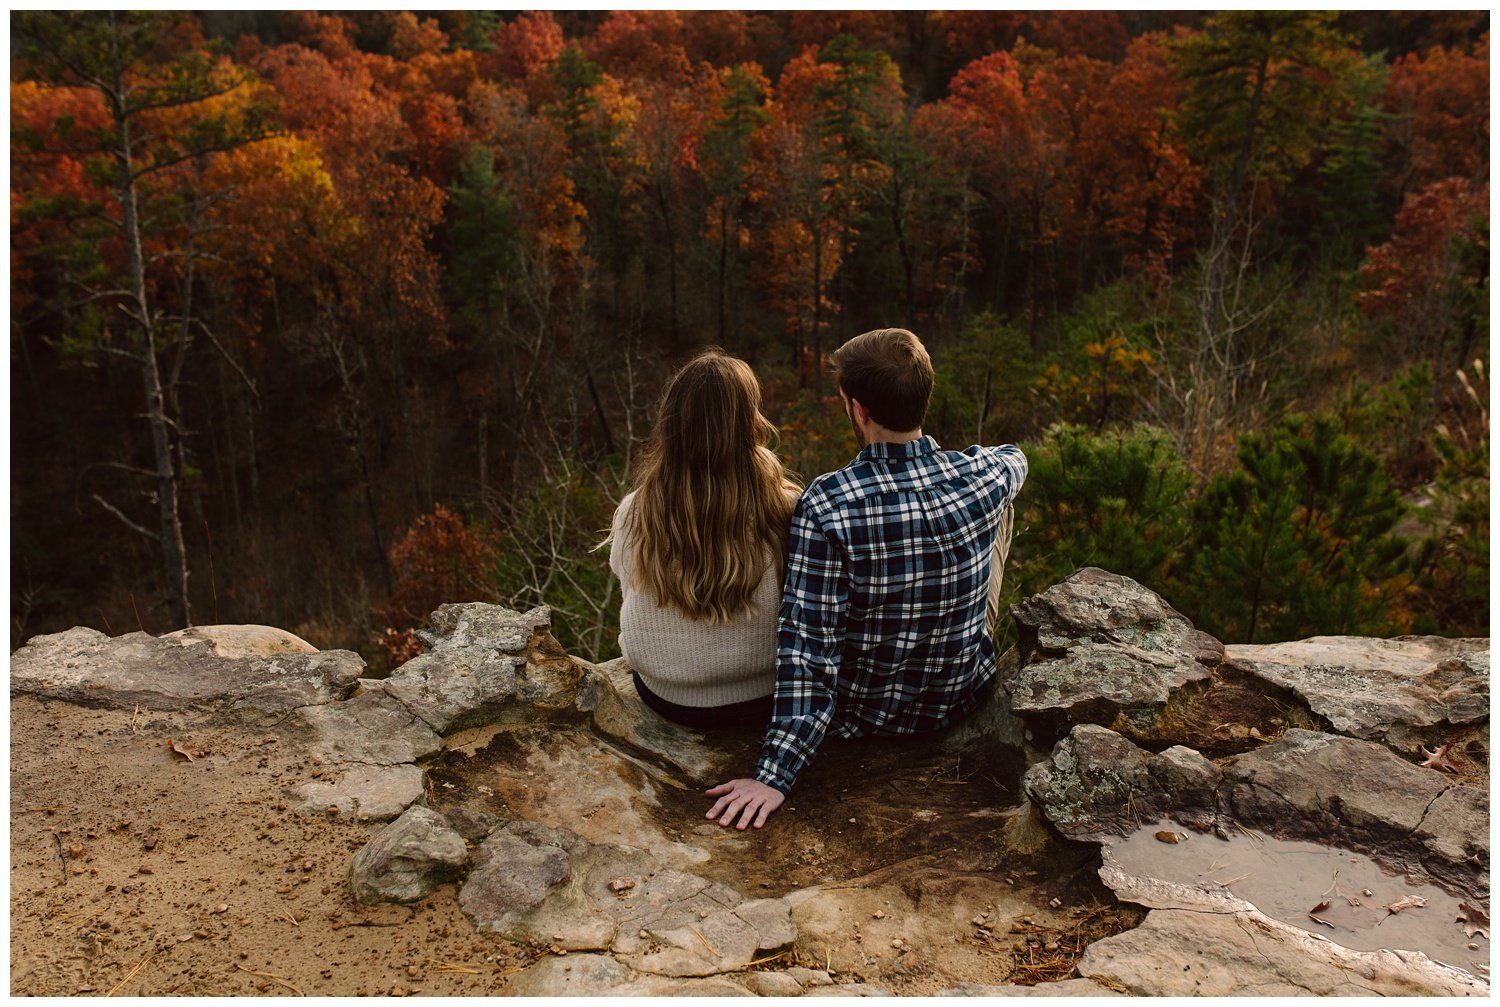 kendra_Farris_photography_red_river_gorge_photographer_proposal_engagement_elopement-55.jpg